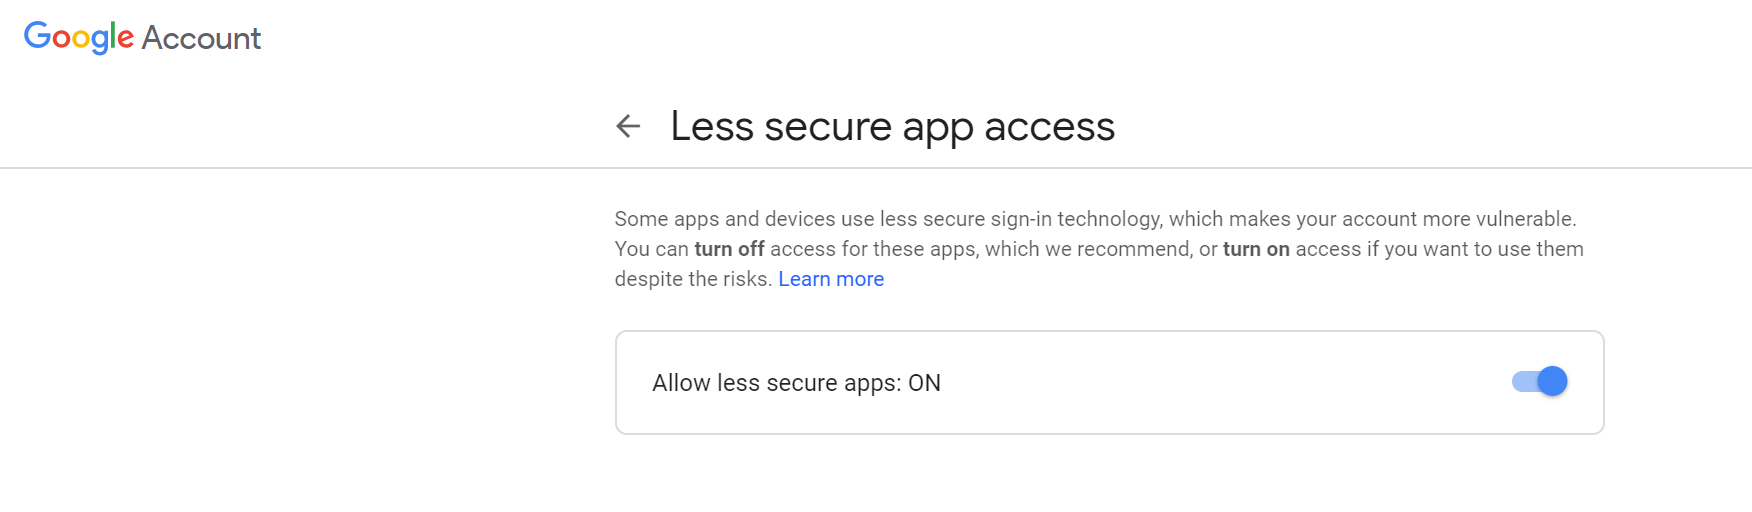 gmail account settings for less secure apps windows 10 mail app